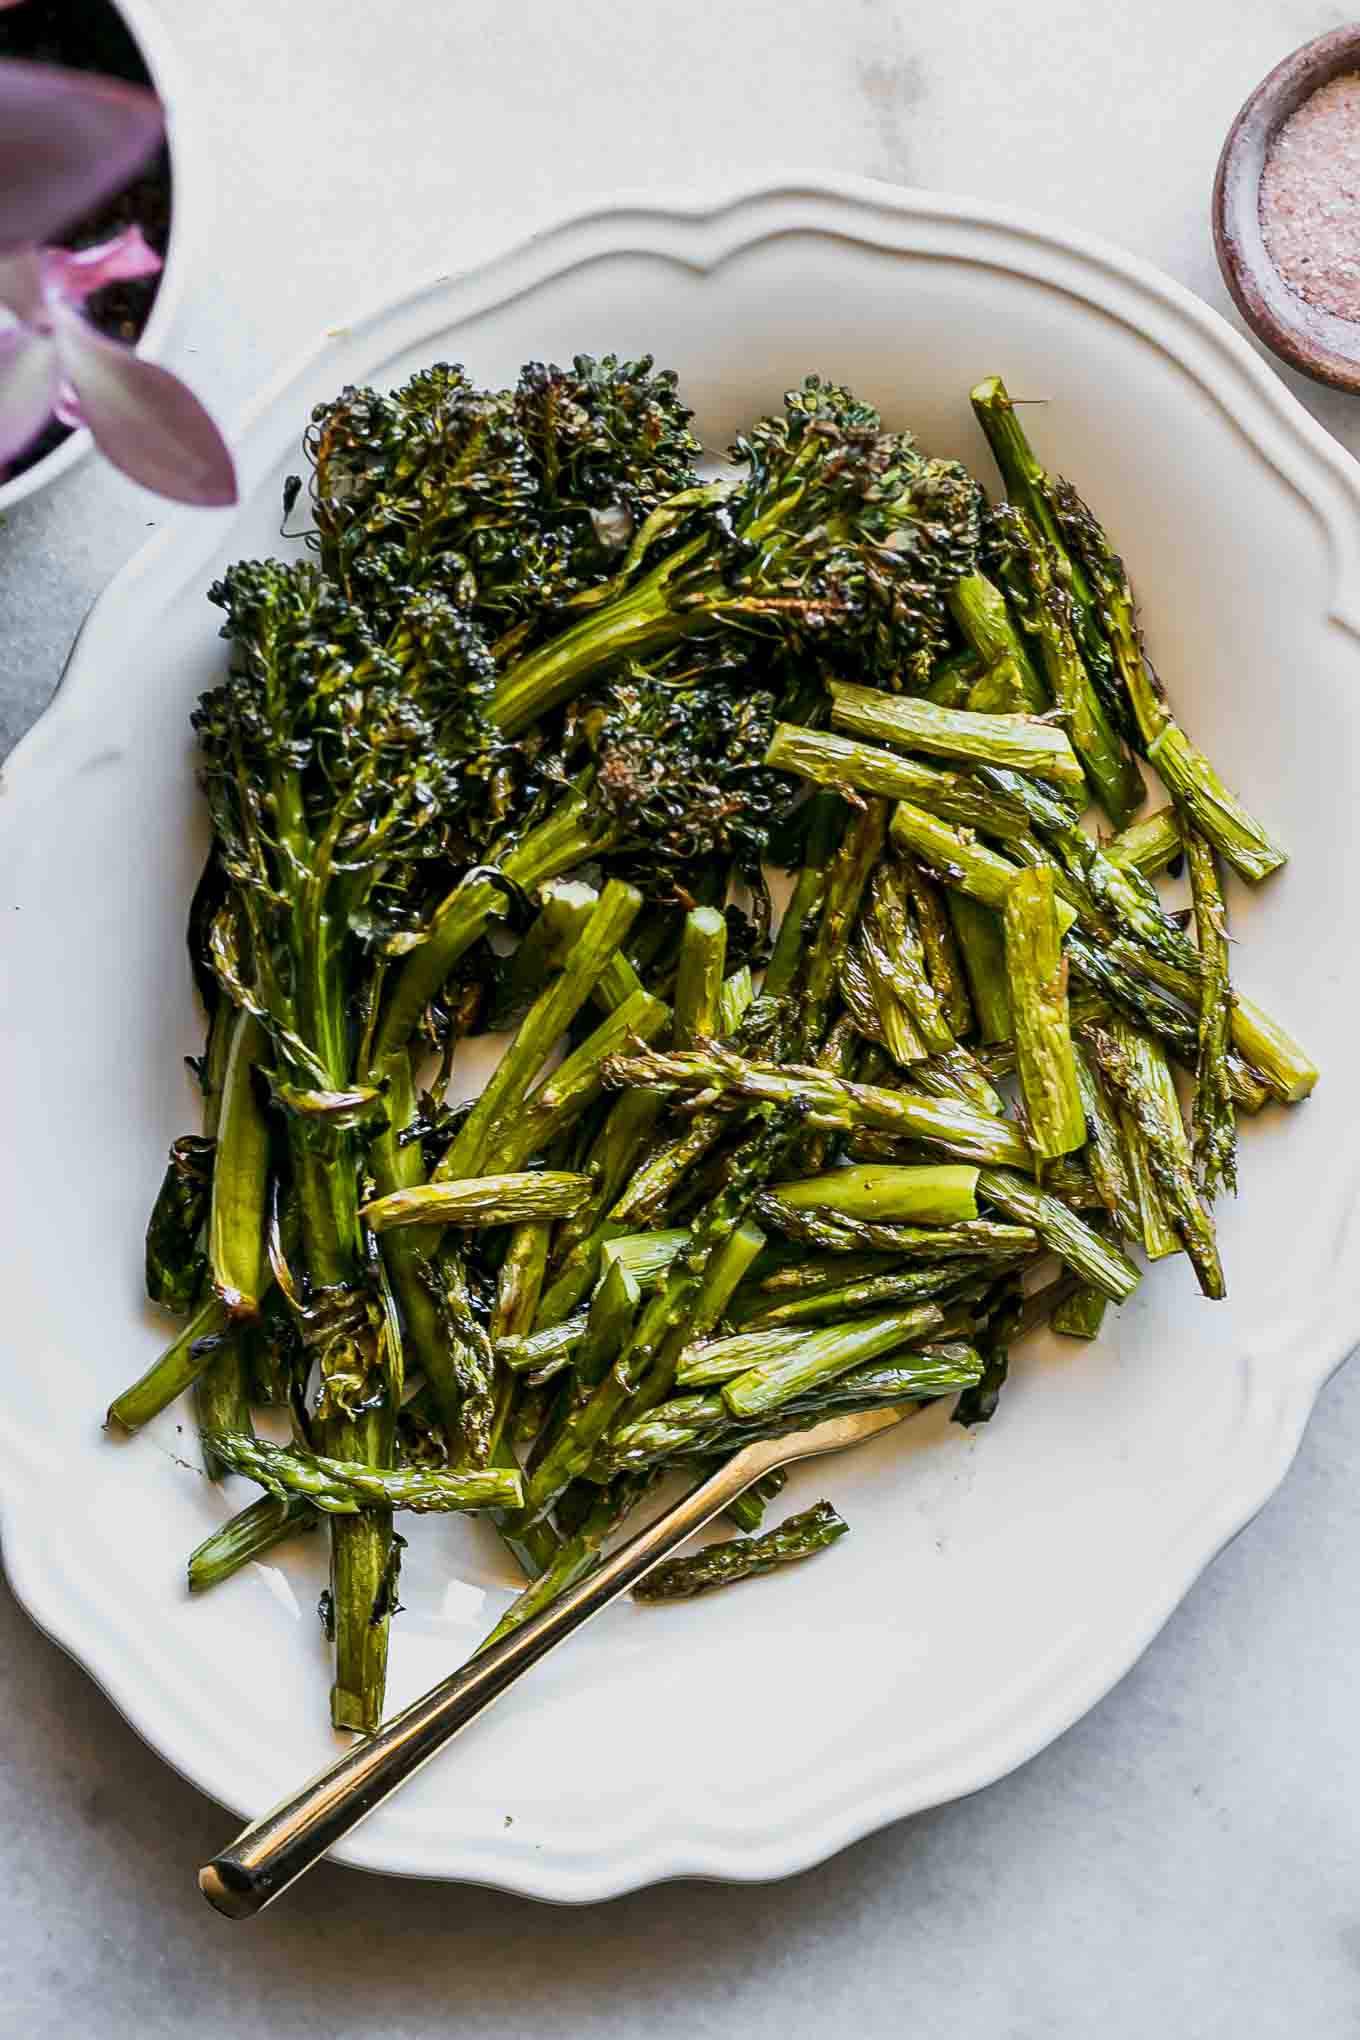 roasted asparagus and broccolini on a white plate with a gold fork